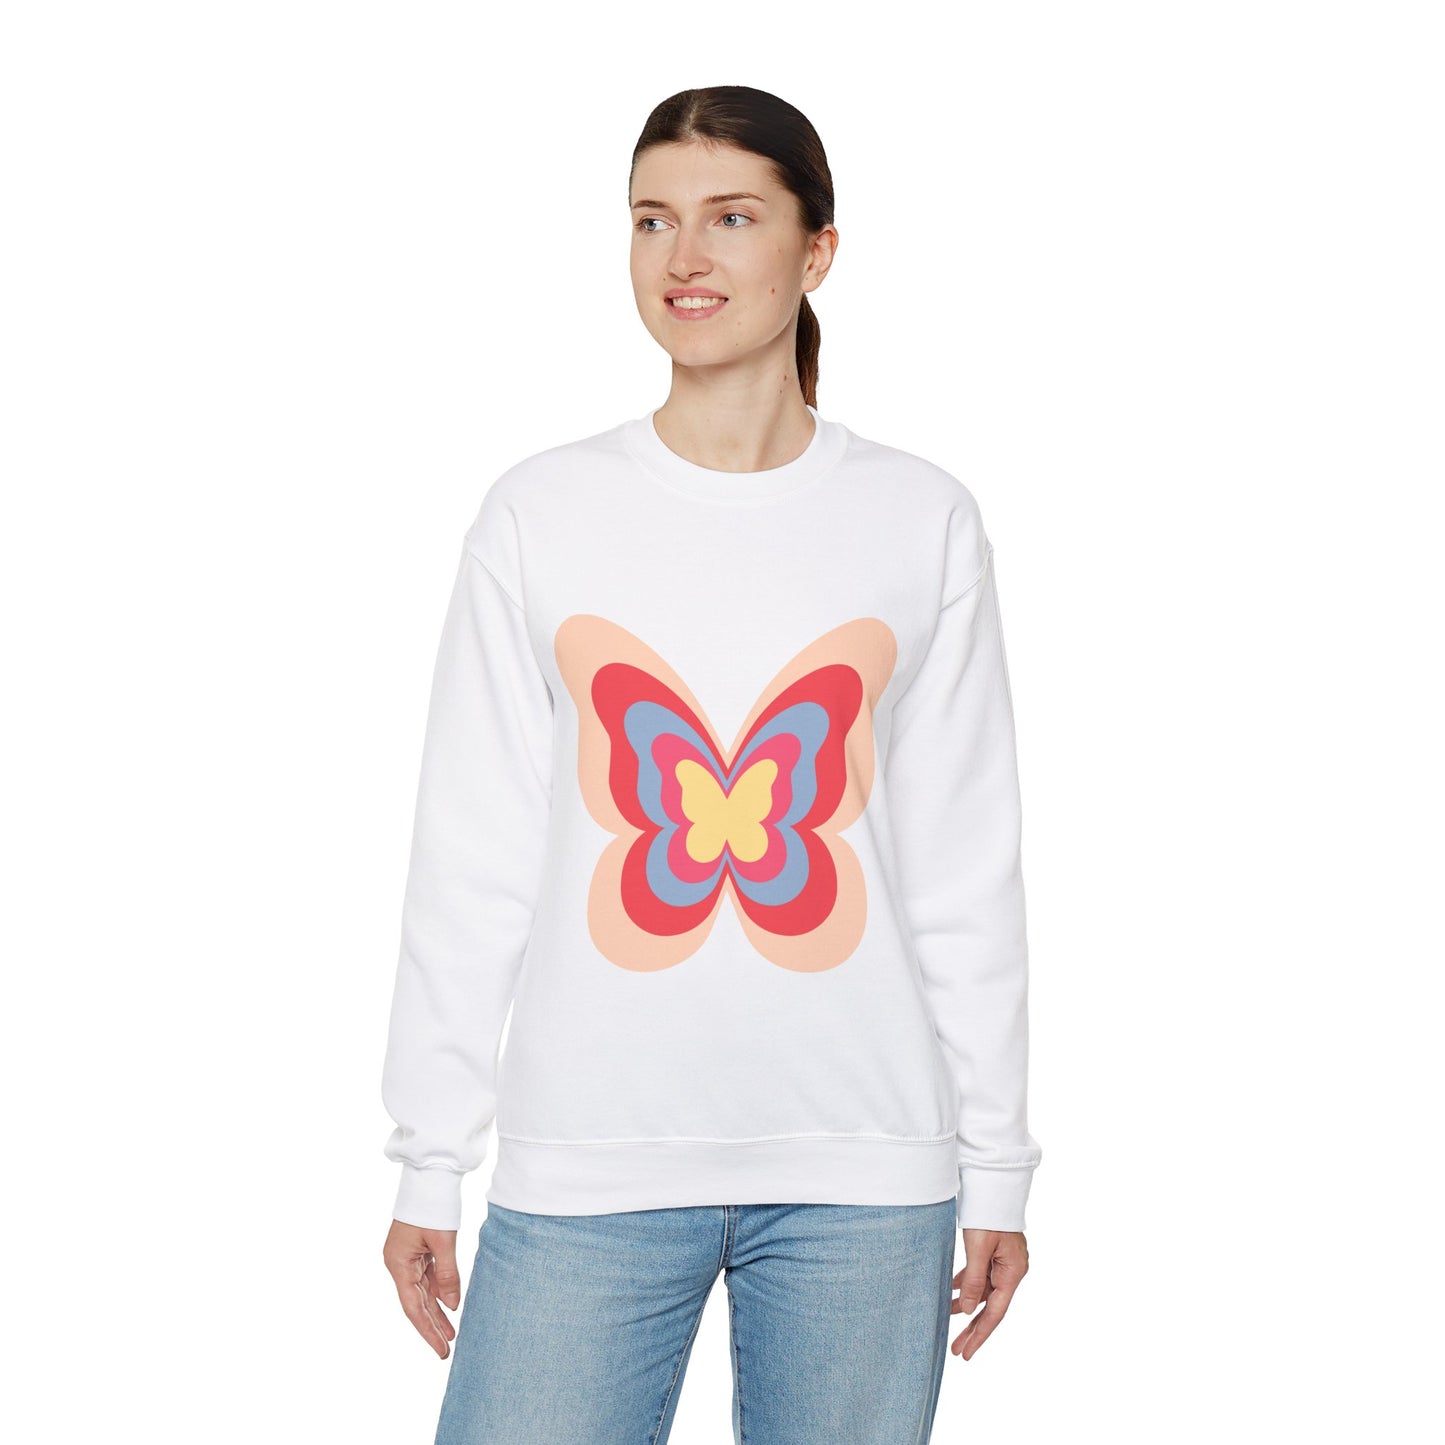 Personalized premium sweatshirt for mom, comfort and style, mother's day, gifts for mom's day, custom mama, butterfly design